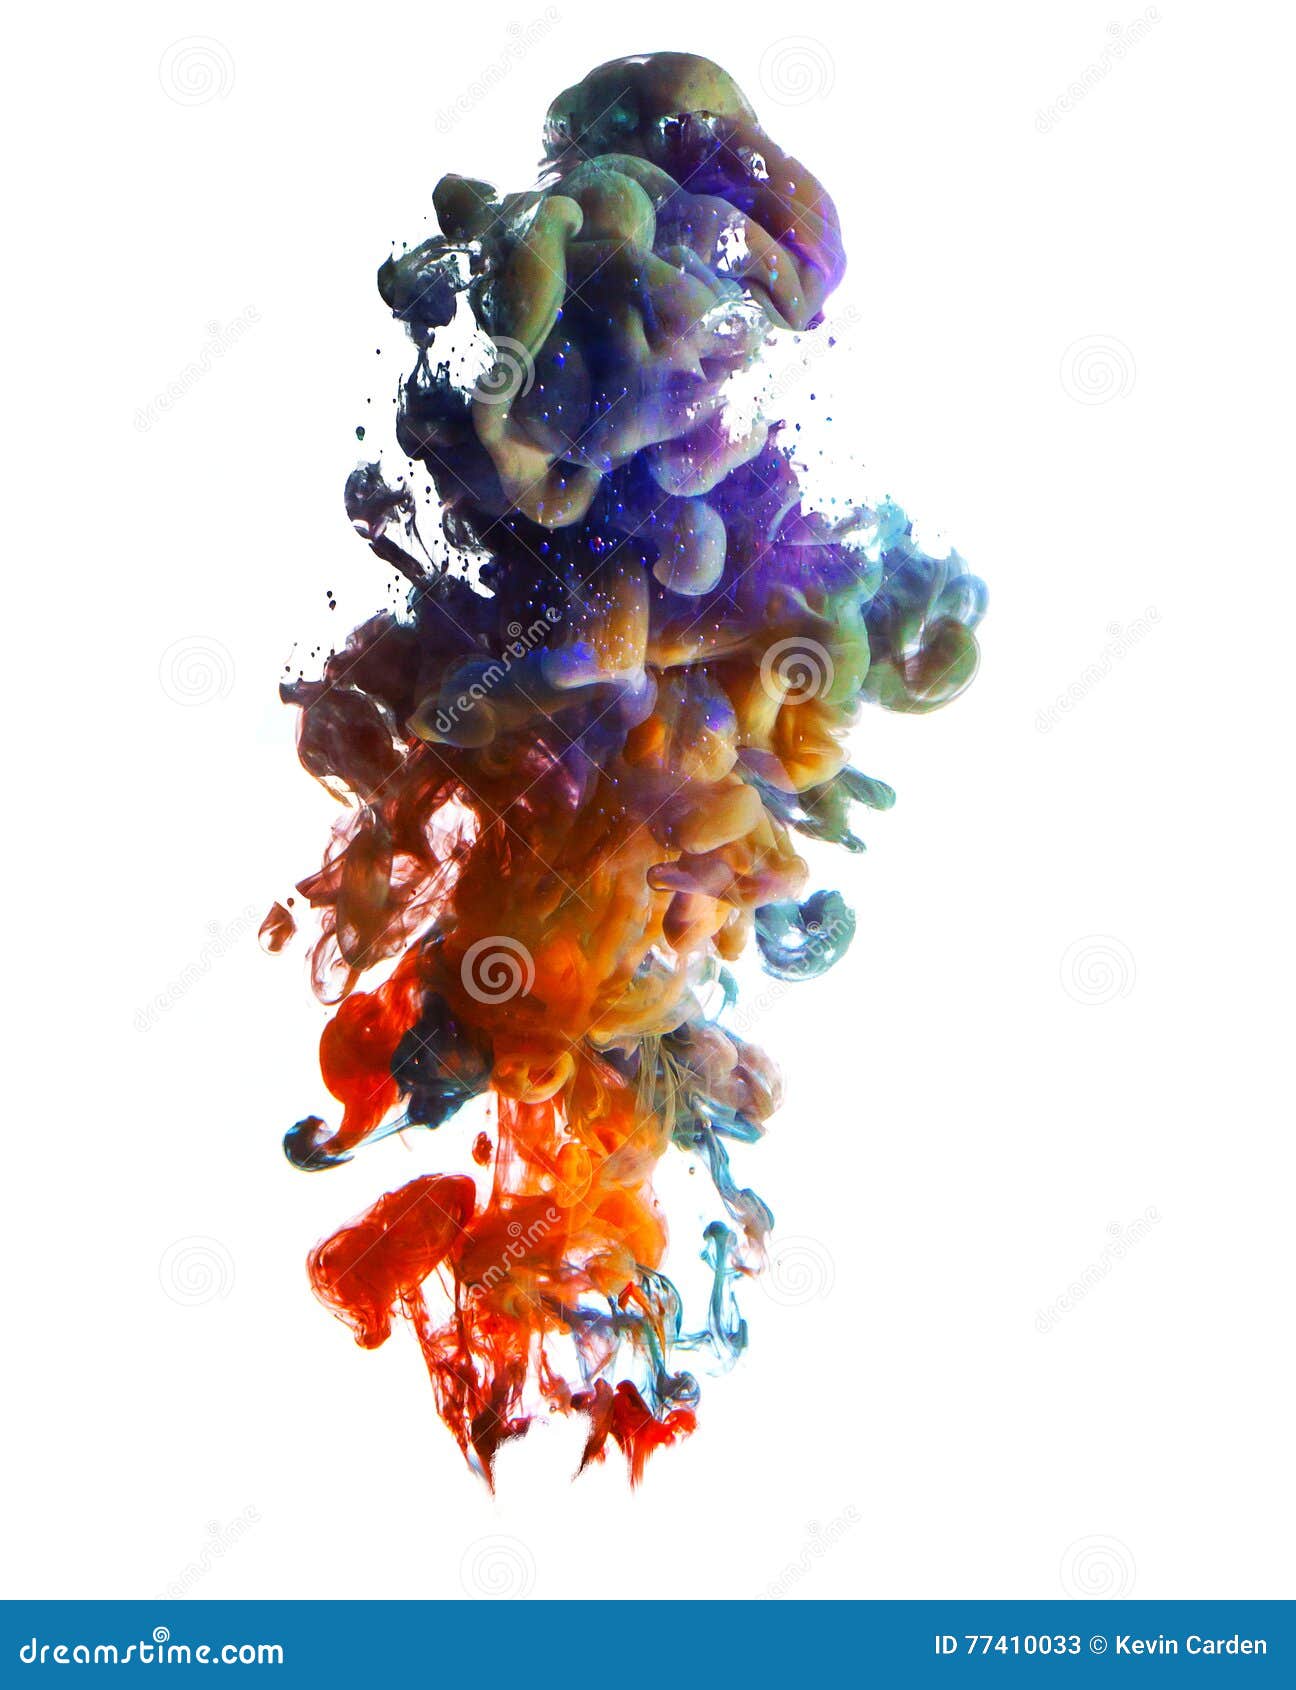 Colorful paints in water stock image. Image of pattern - 77410033